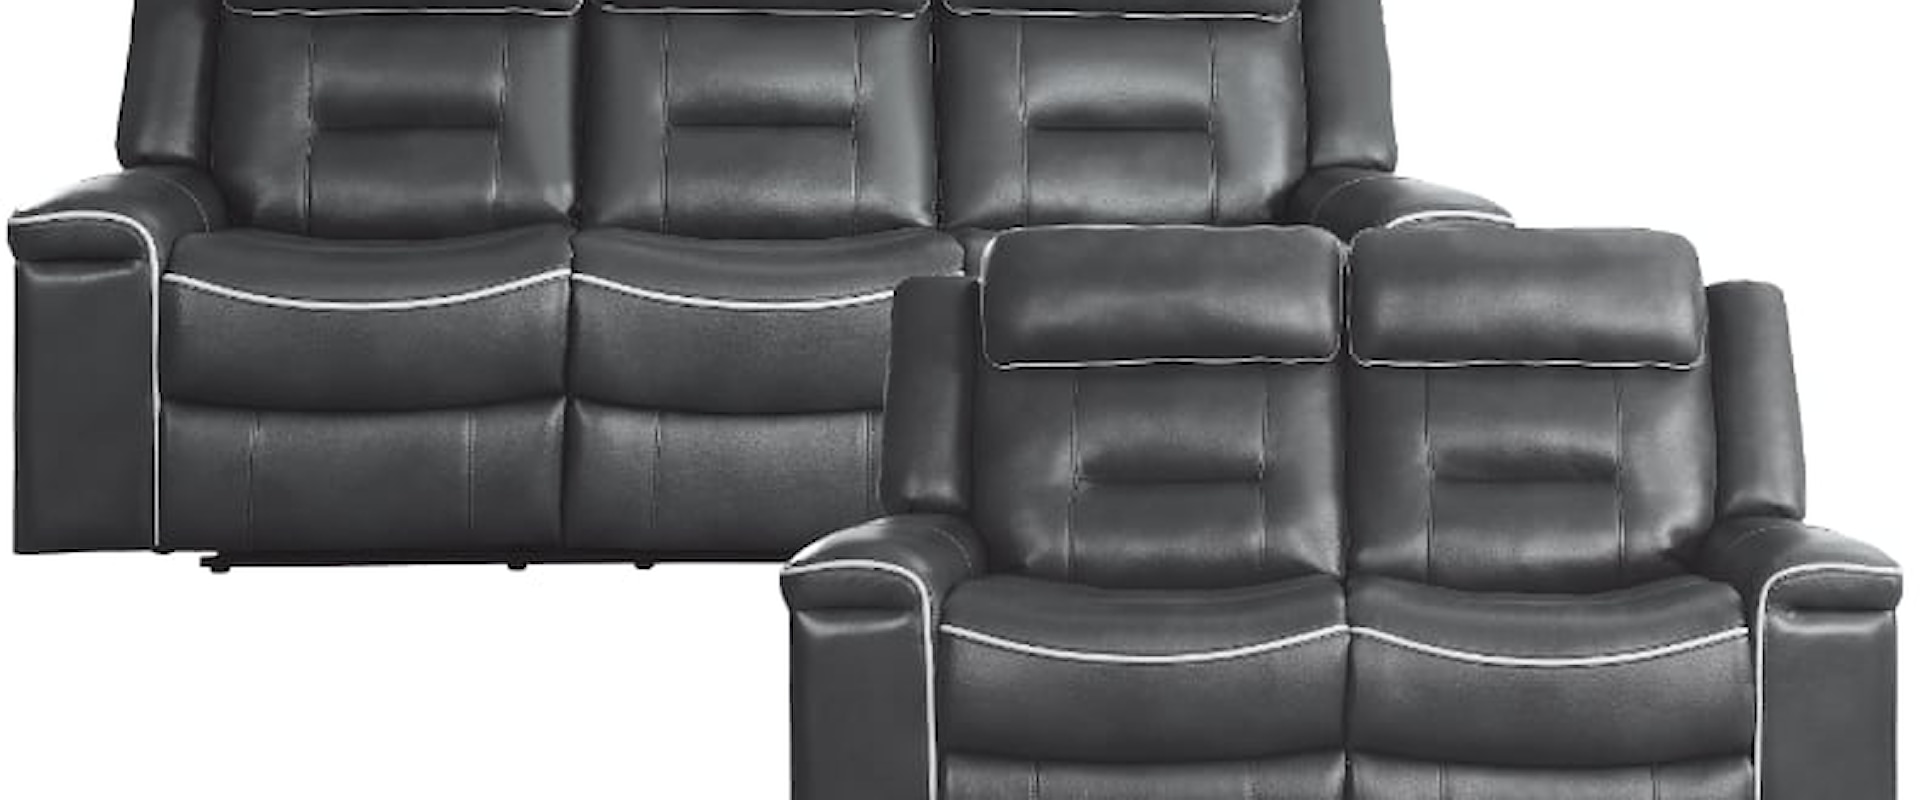 Contemporary 2-Piece Reclining Living Room Set with Extended Reclining Mechanism